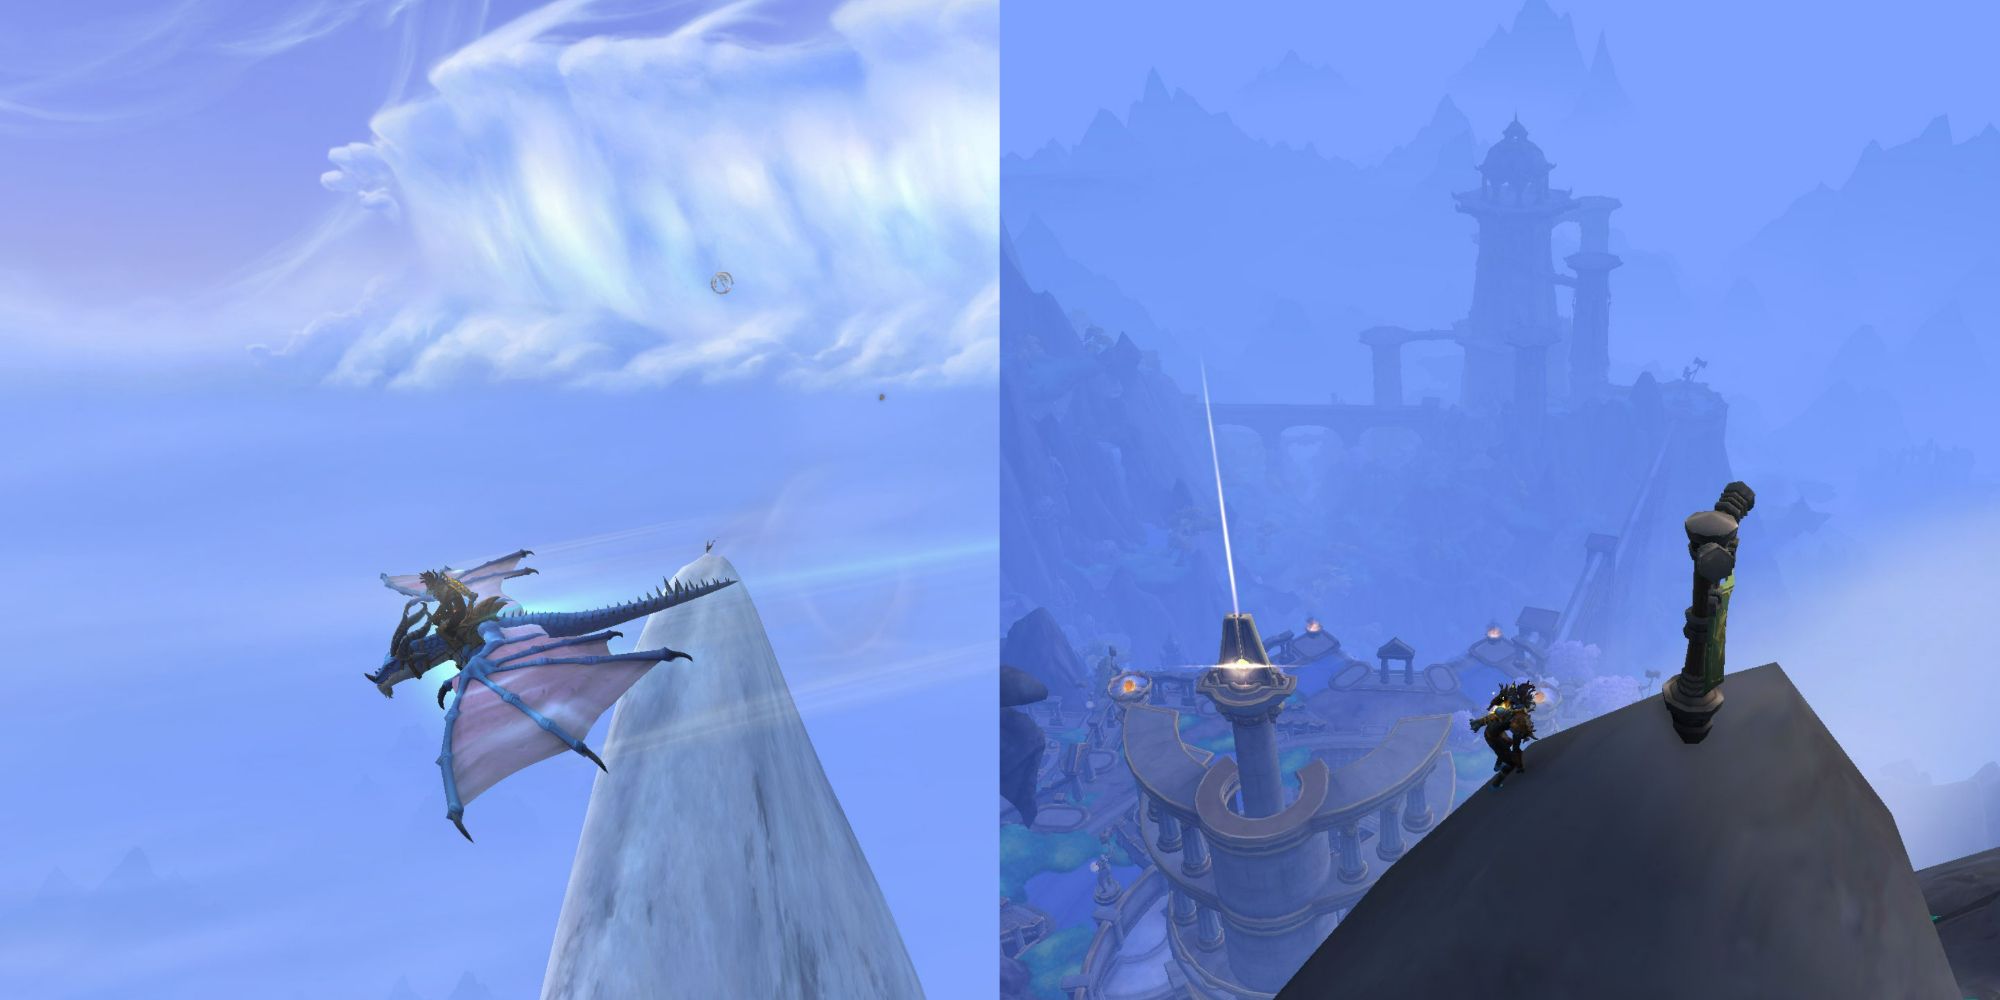 World of Warcraft spit image of dragonriding and dragonscale expedition tyrhold flag